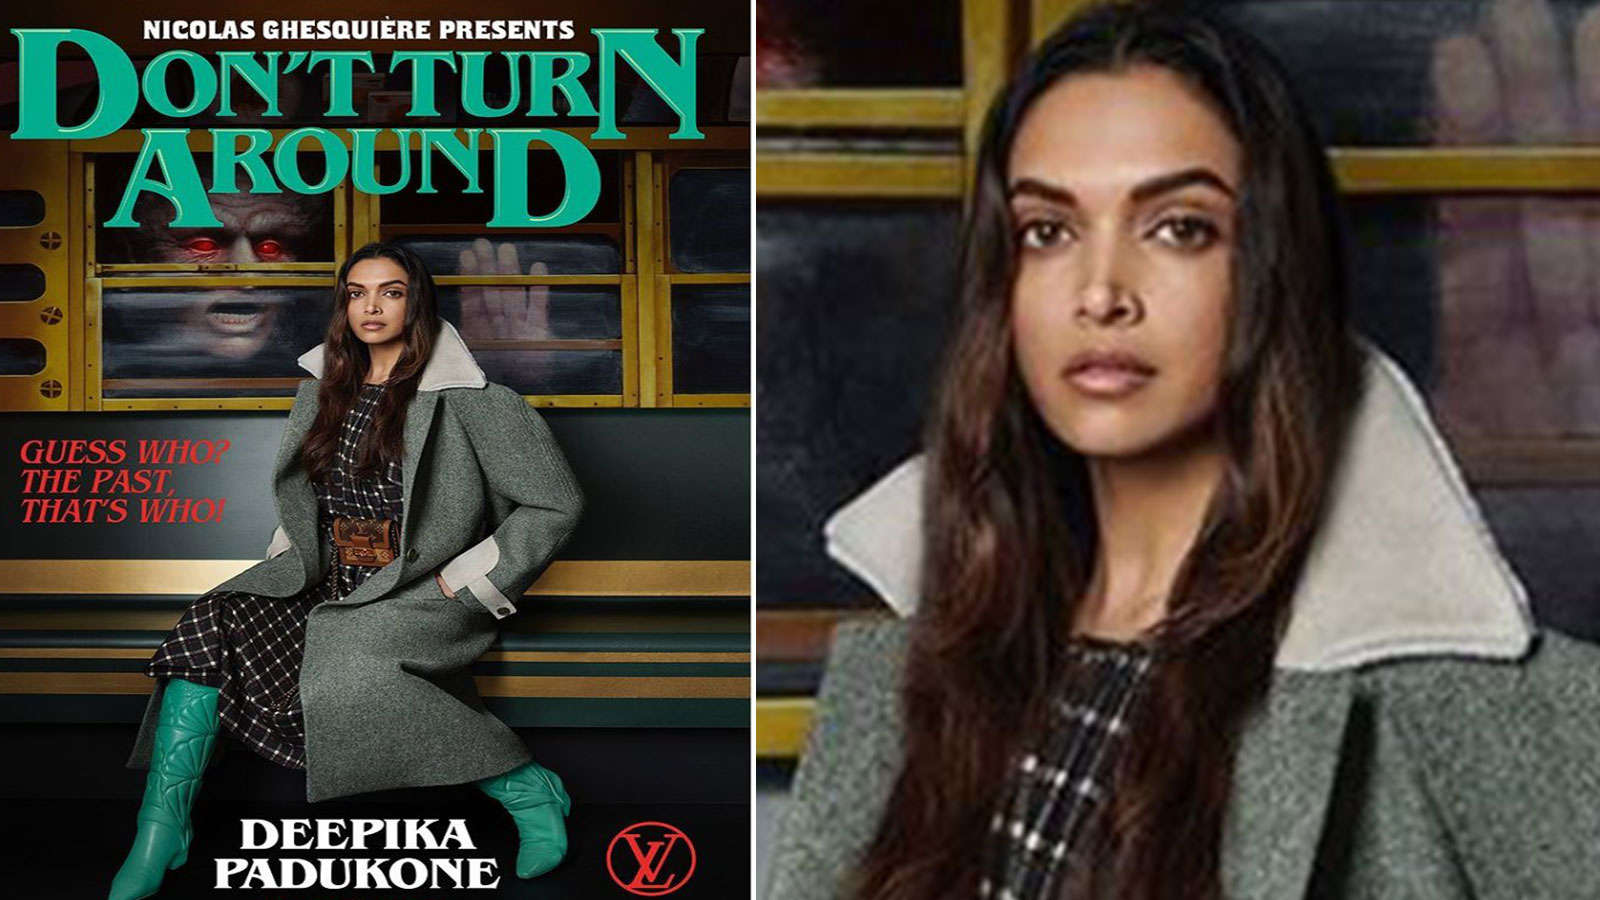 Deepika is 1st Indian star in a Louis Vuitton global campaign